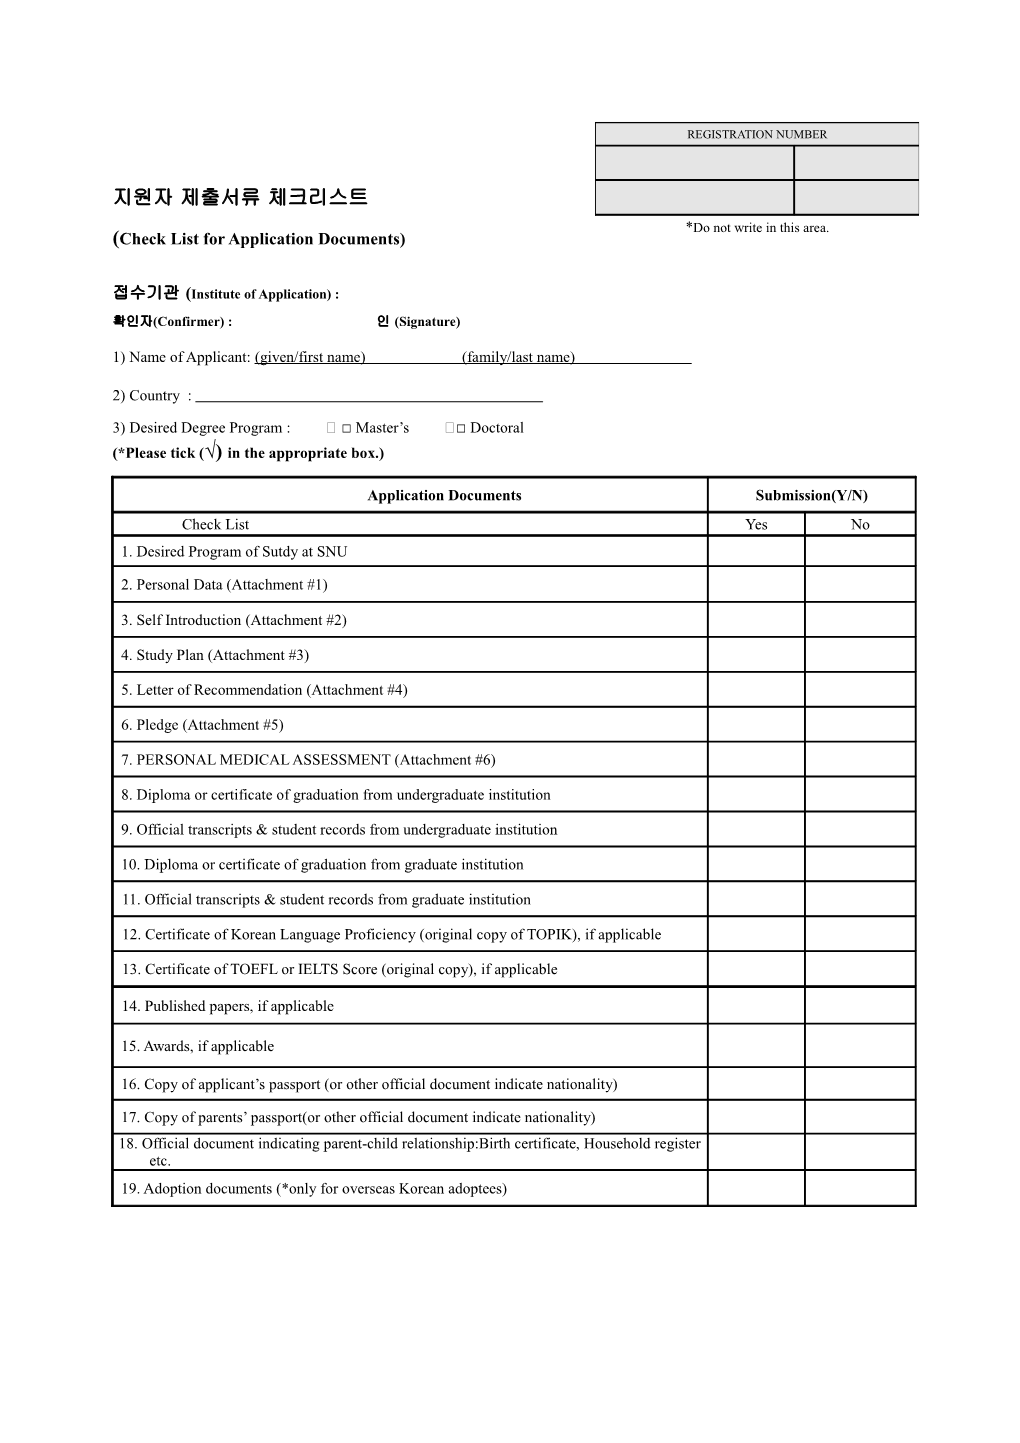 Check List for Application Documents